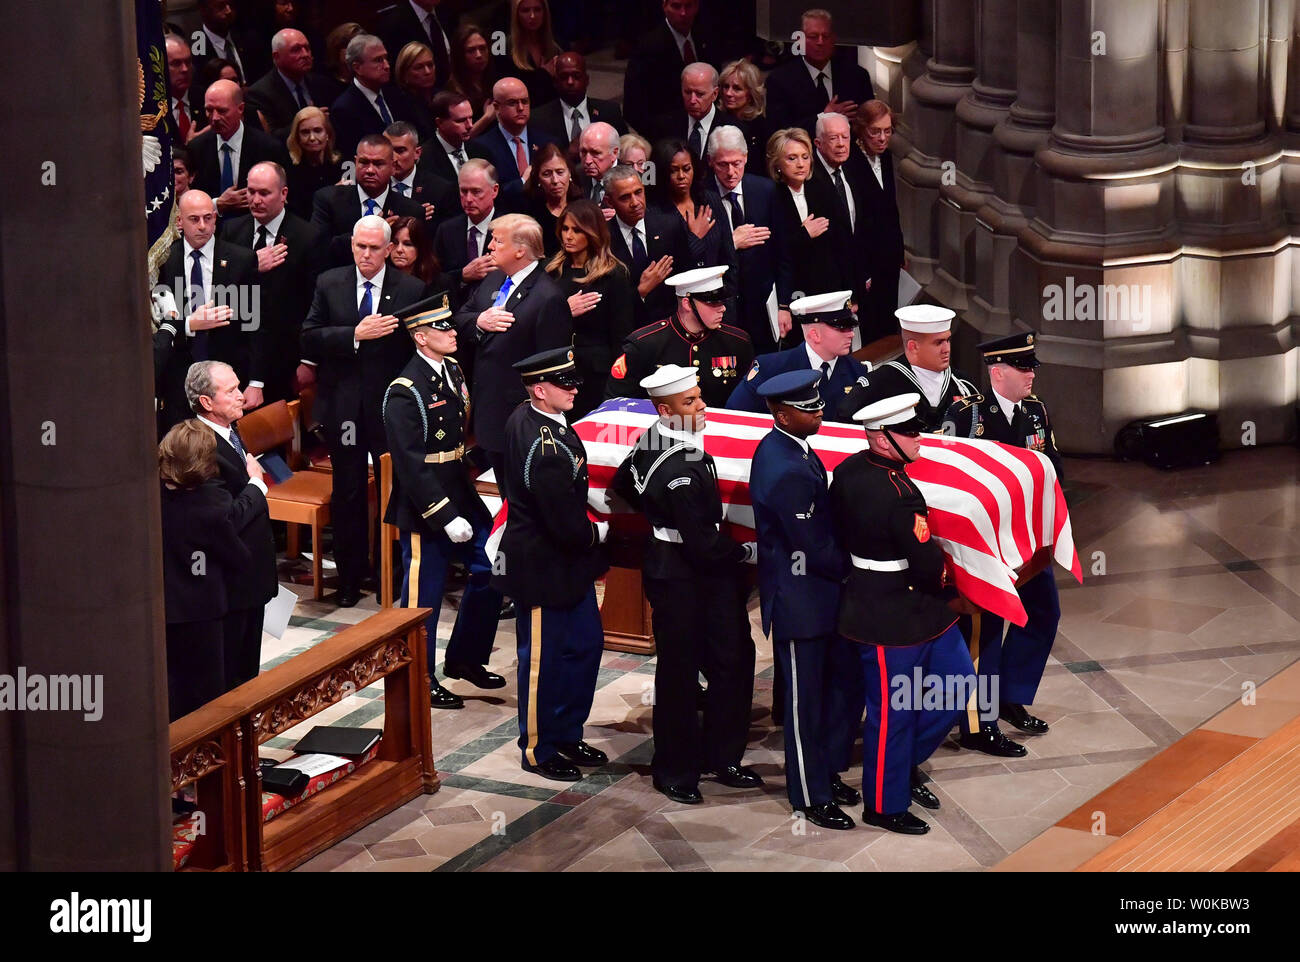 The casket arrives for the funeral of former President George H.W. Bush at the National Cathedral in Washington D.C. on December 5, 2018. Photo by Kevin Dietsch/UPI Stock Photo